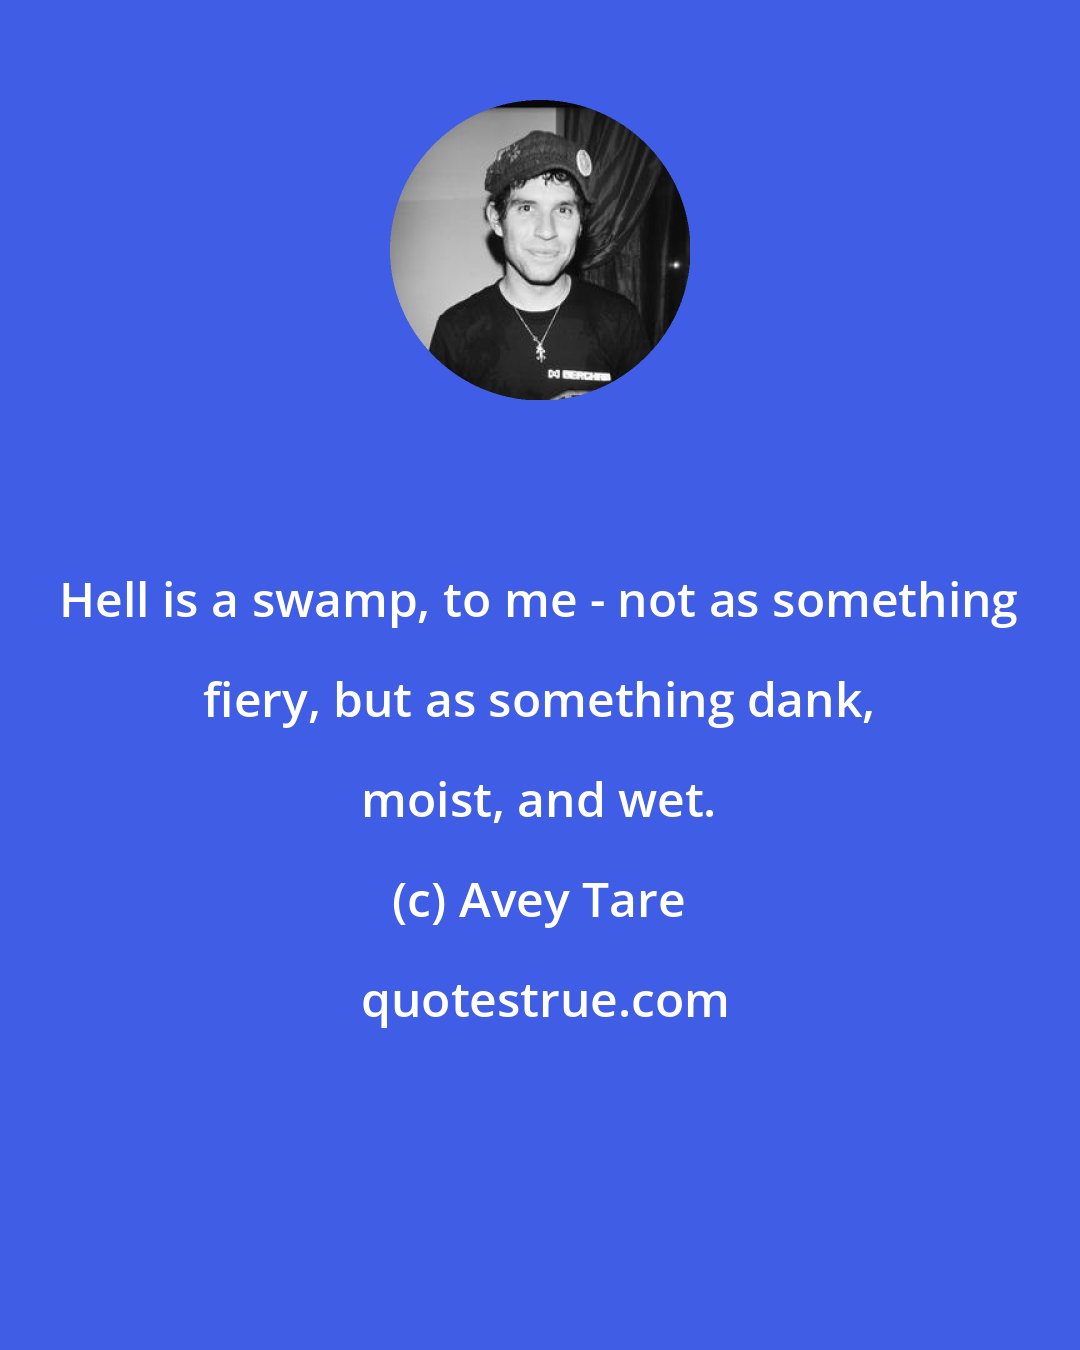 Avey Tare: Hell is a swamp, to me - not as something fiery, but as something dank, moist, and wet.